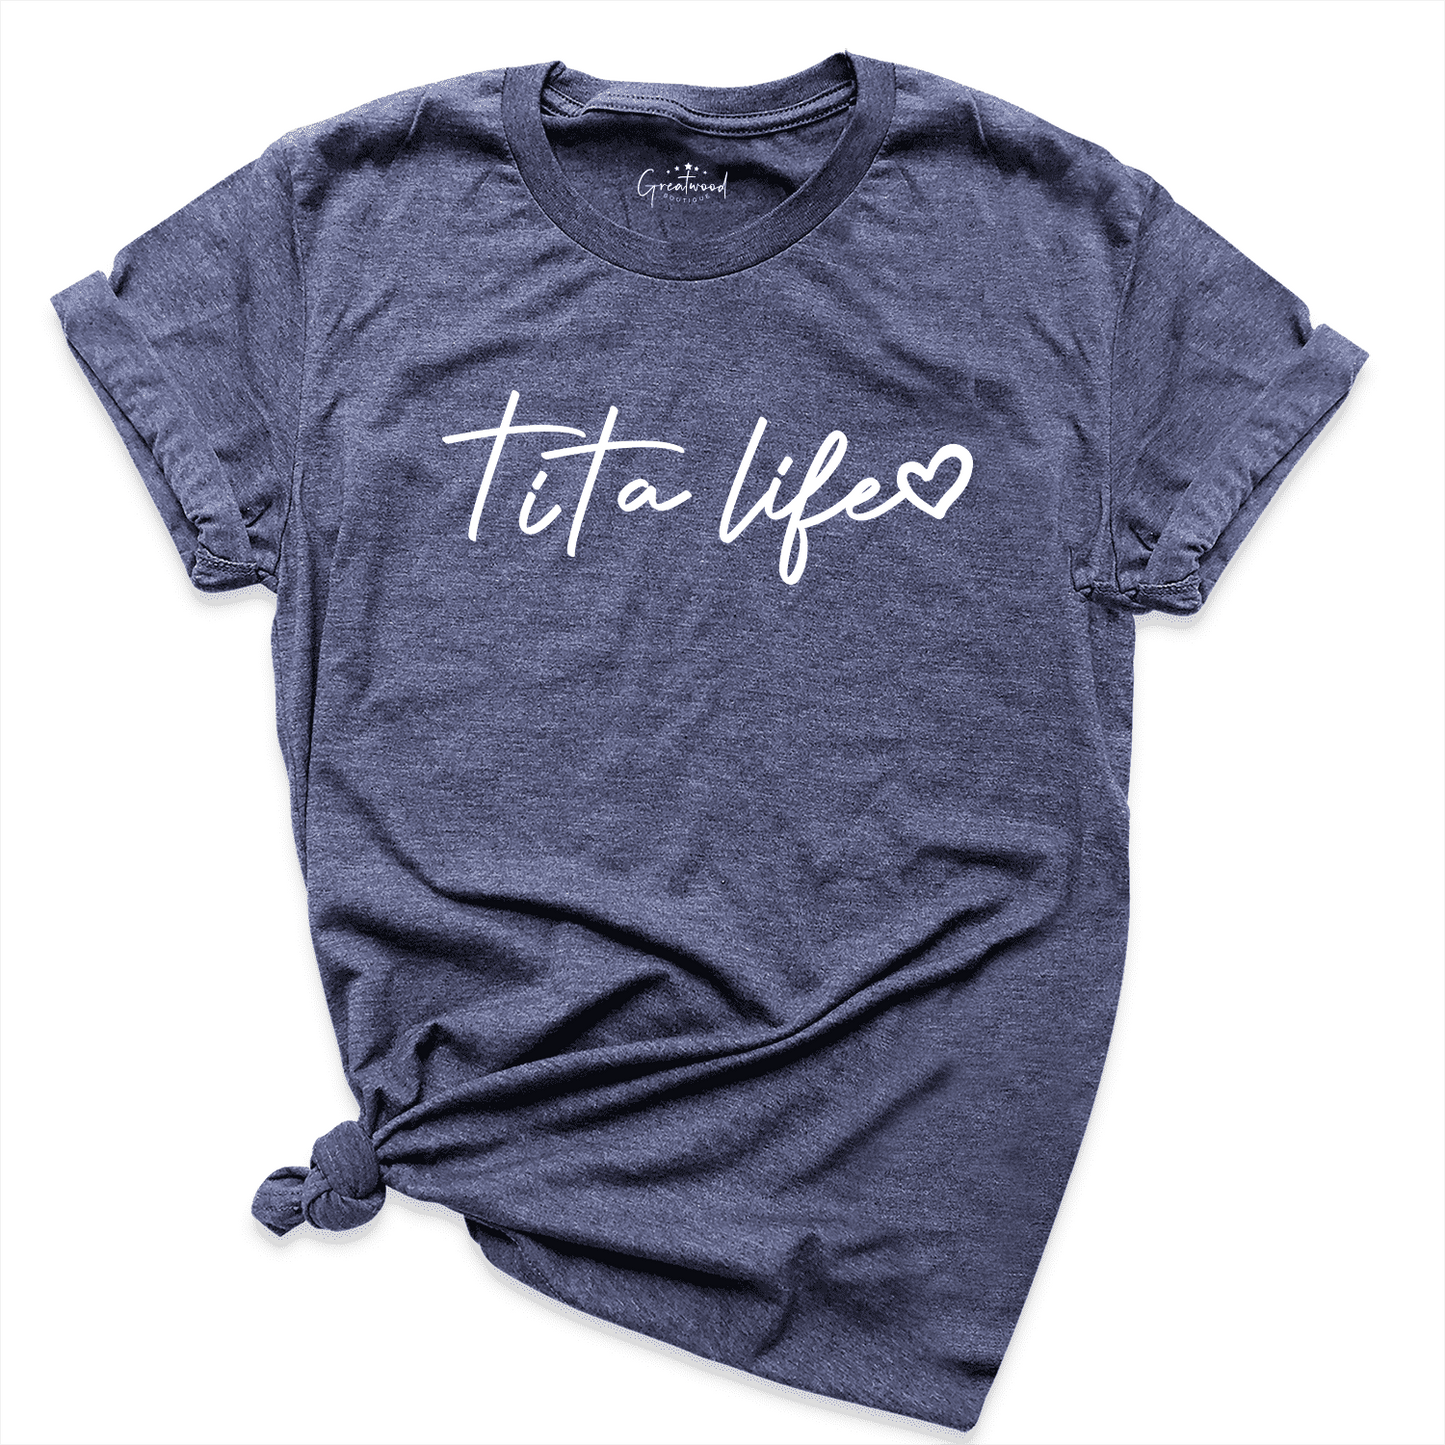 Tita Life Shirt Navy - Greatwood Boutique